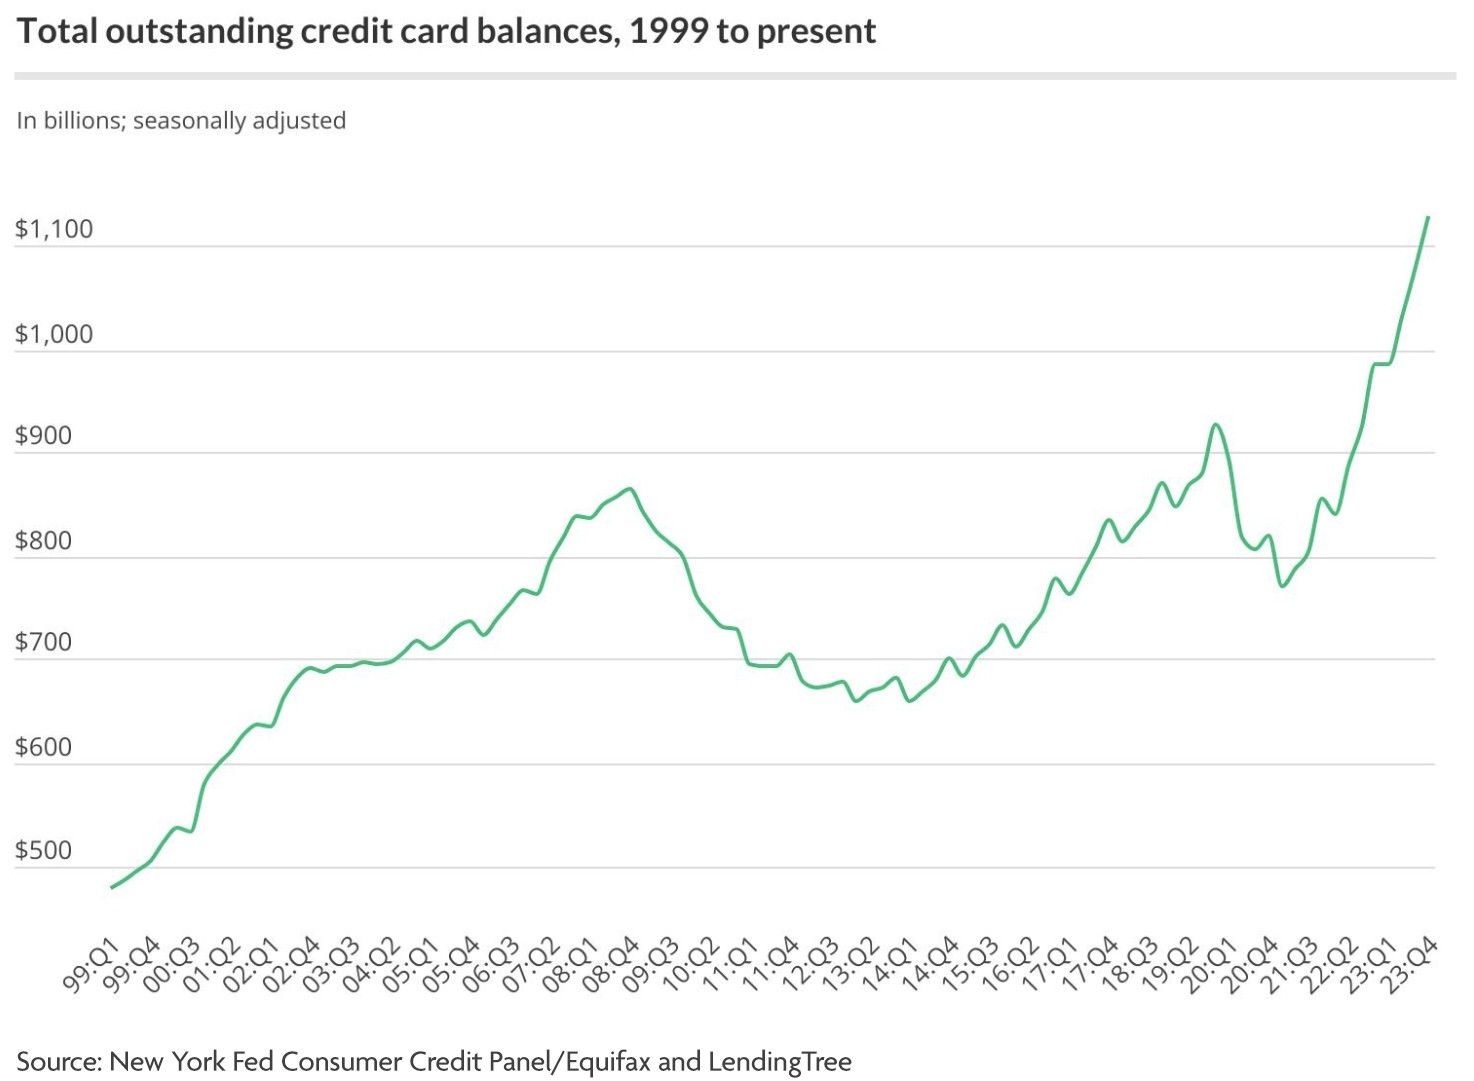 National Credit Card Debt Out of Control – Inflation and Excessive Government Spending